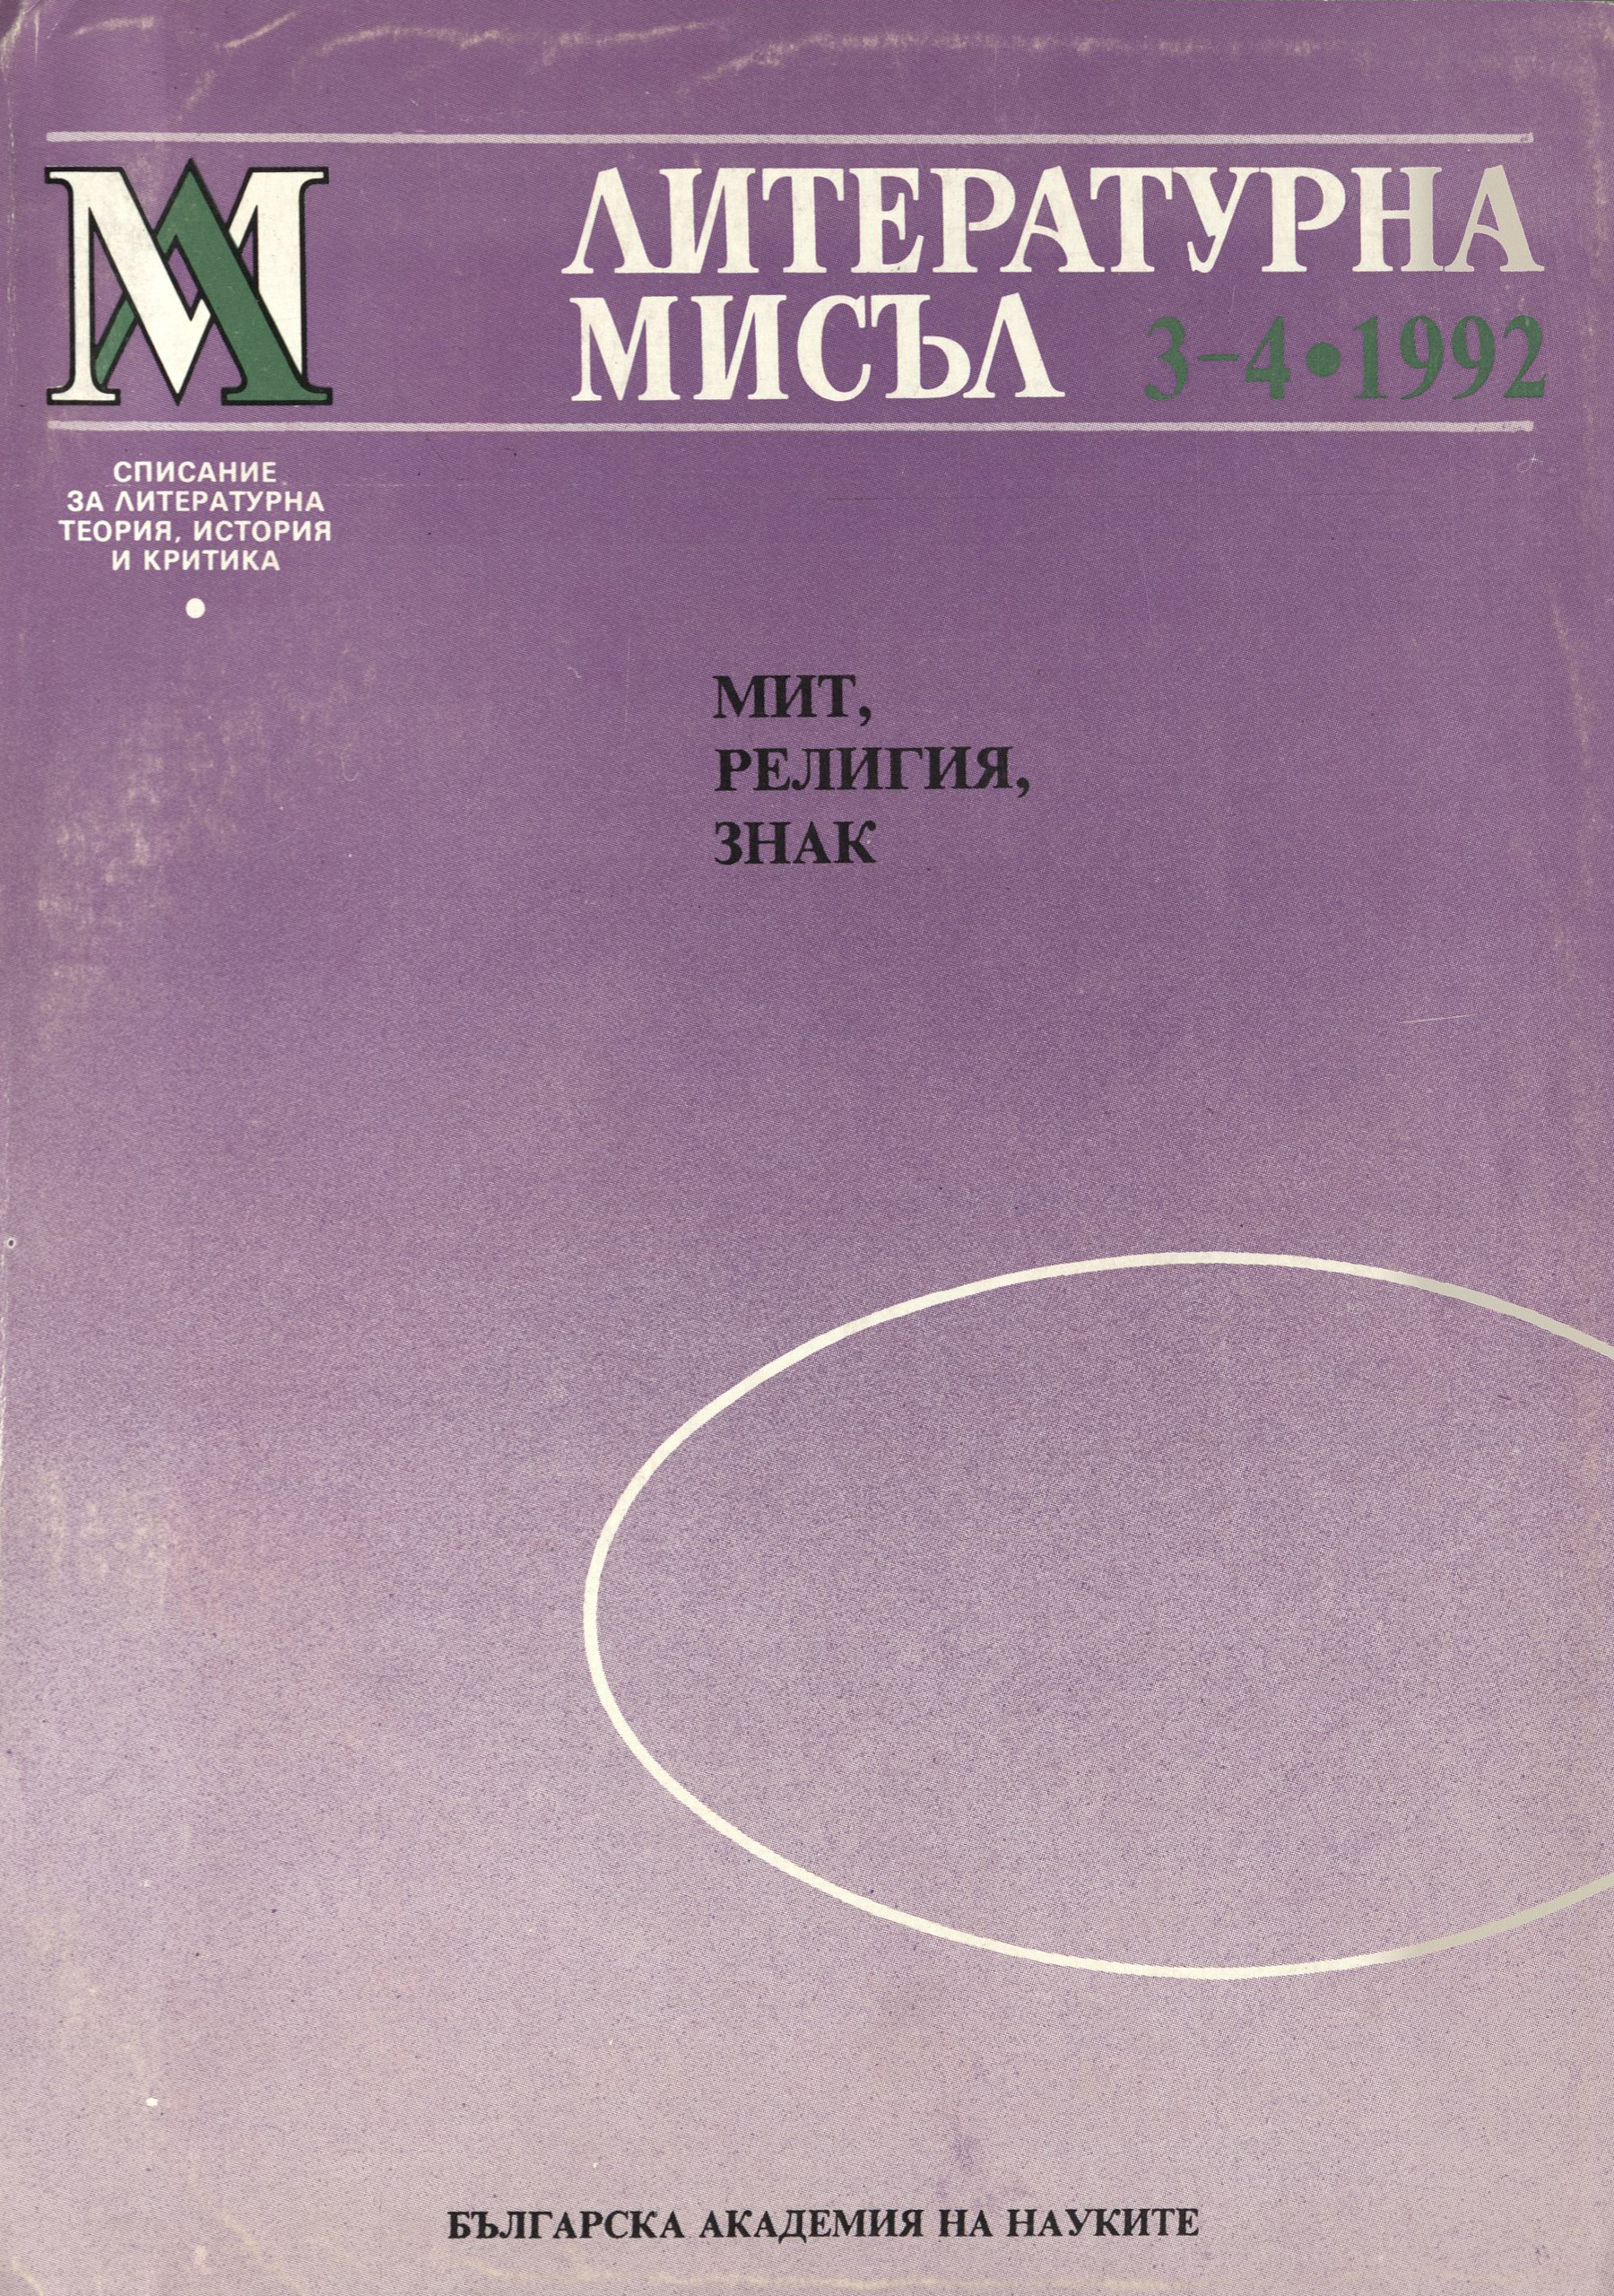 Issue 3-4, 1992